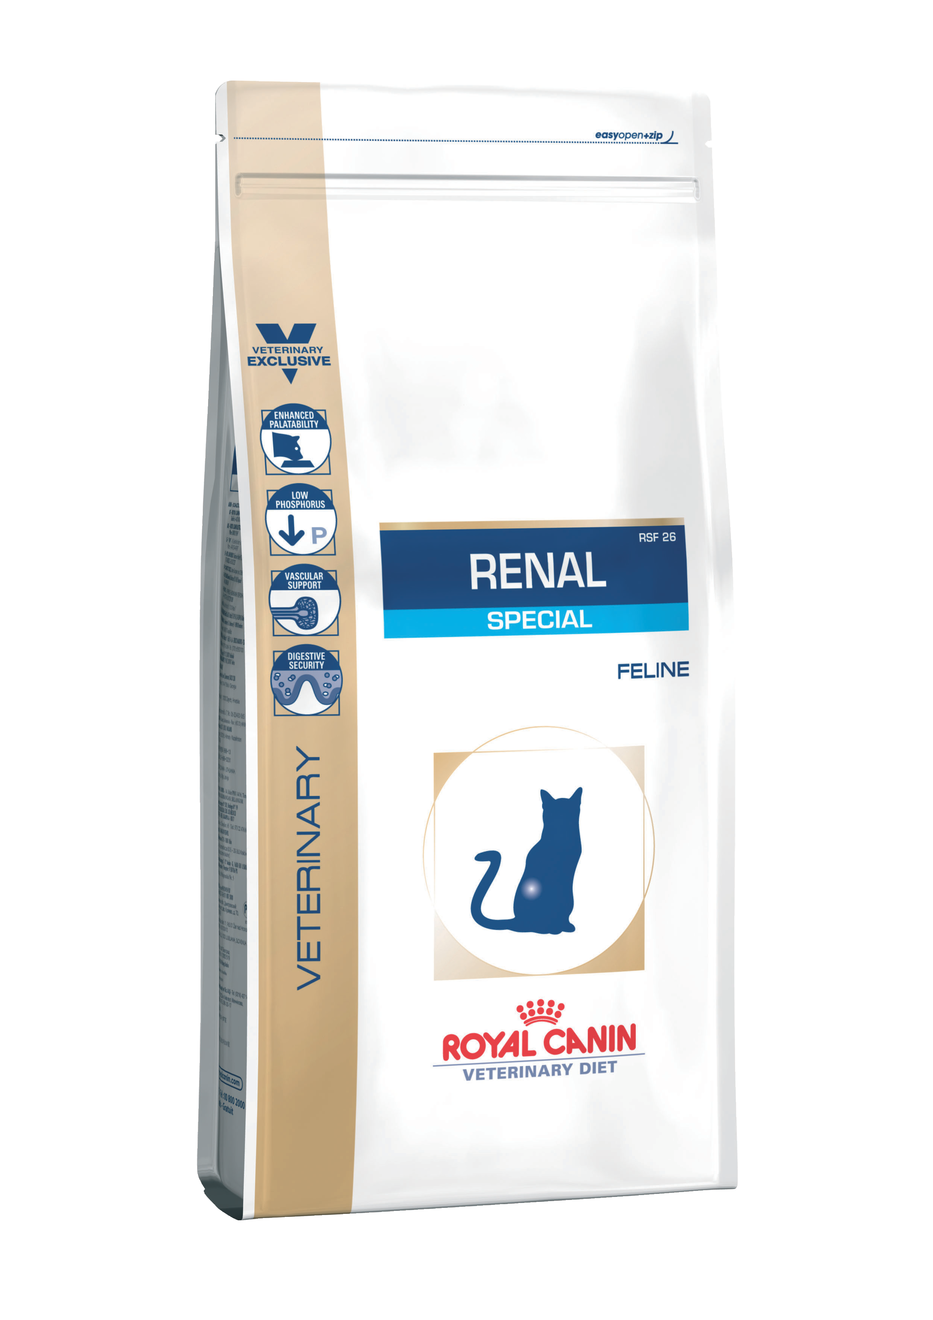 Royal Canin Veterinary Diet Cat RENAL Special - 2kg